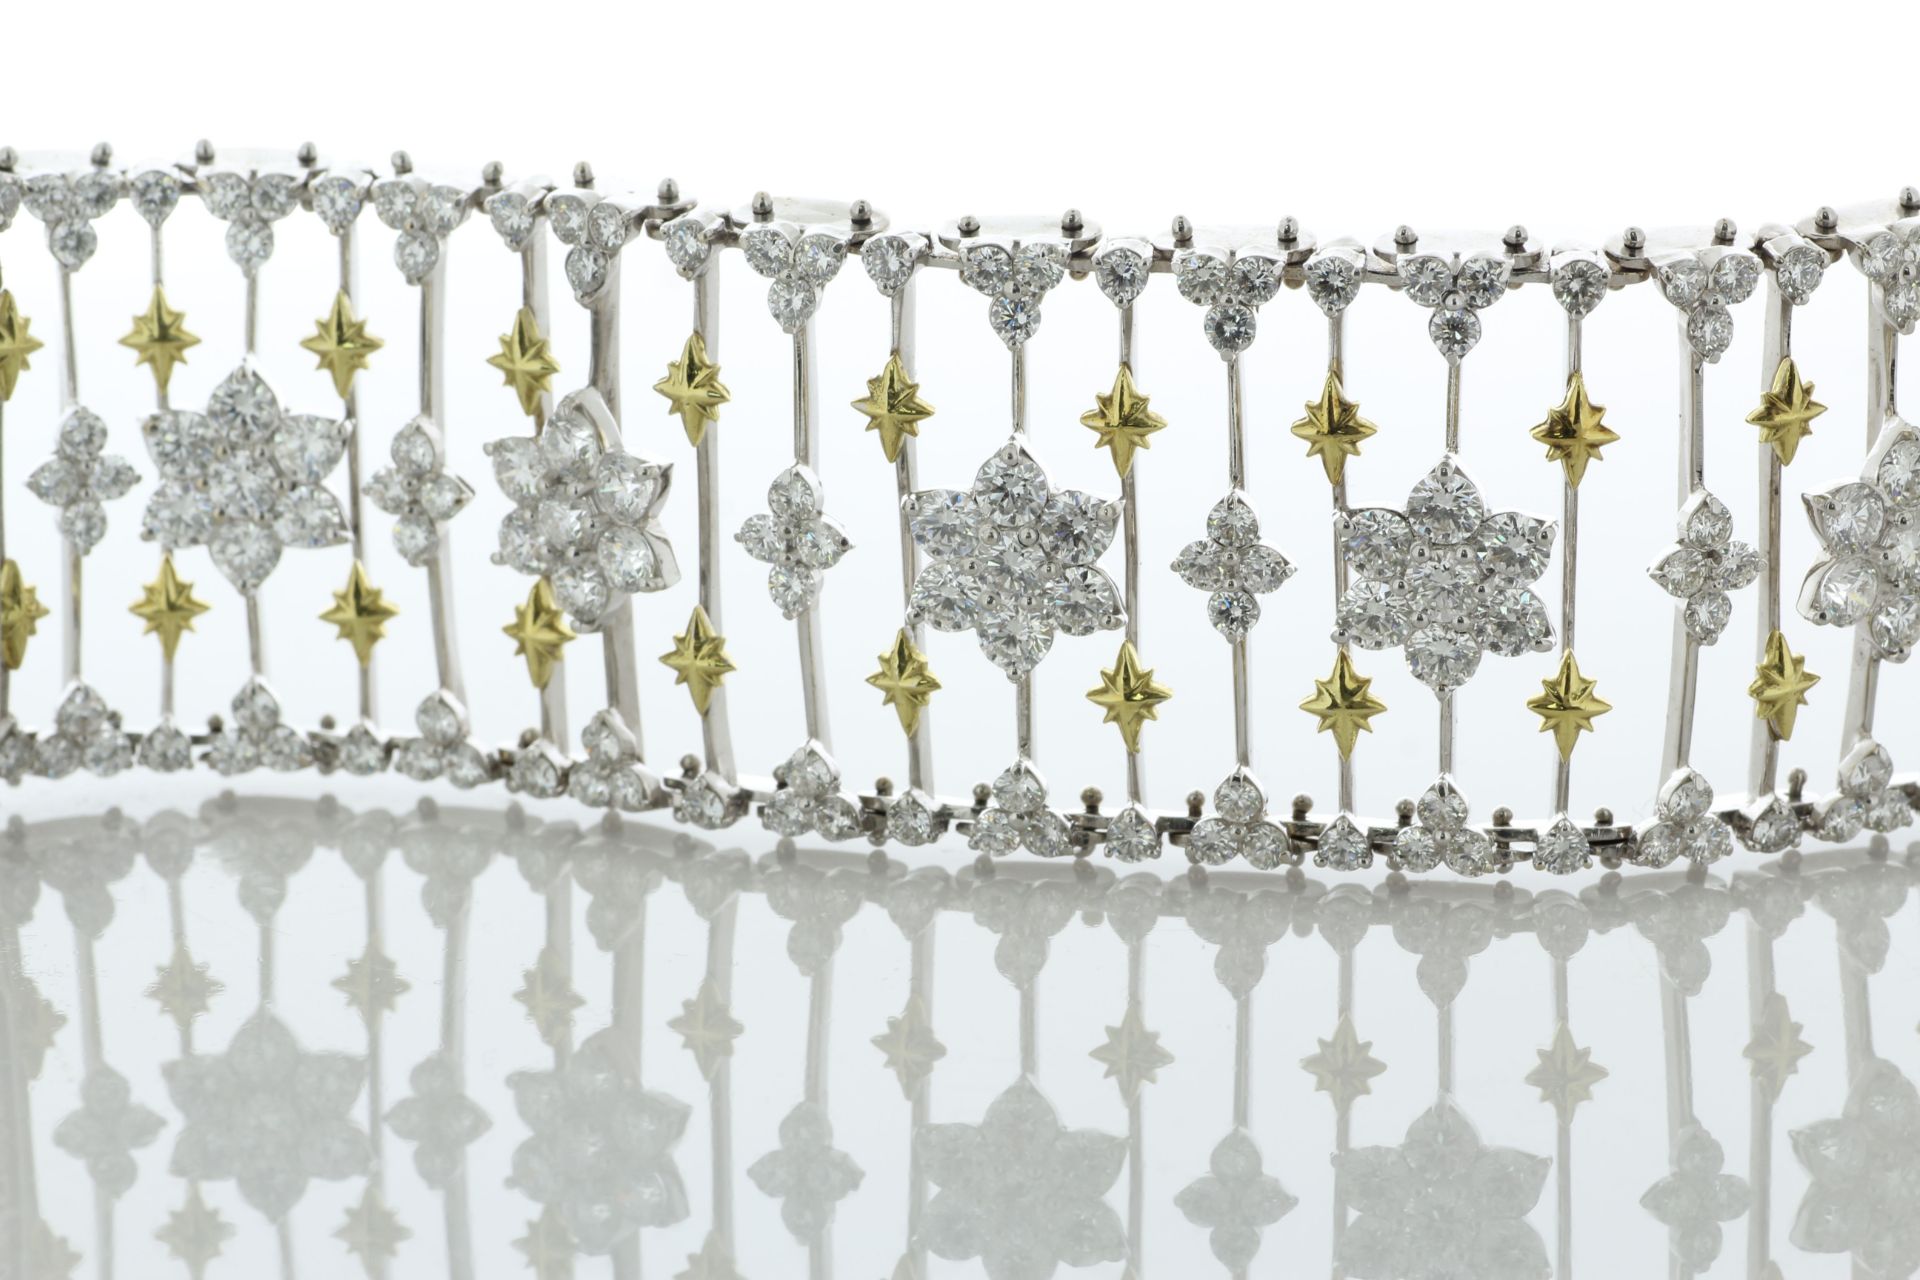 18ct White And Yellow Gold Stambolian Diamond Bracelet 20.67 Carats - Valued By AGI £89,500.00 - - Image 4 of 6